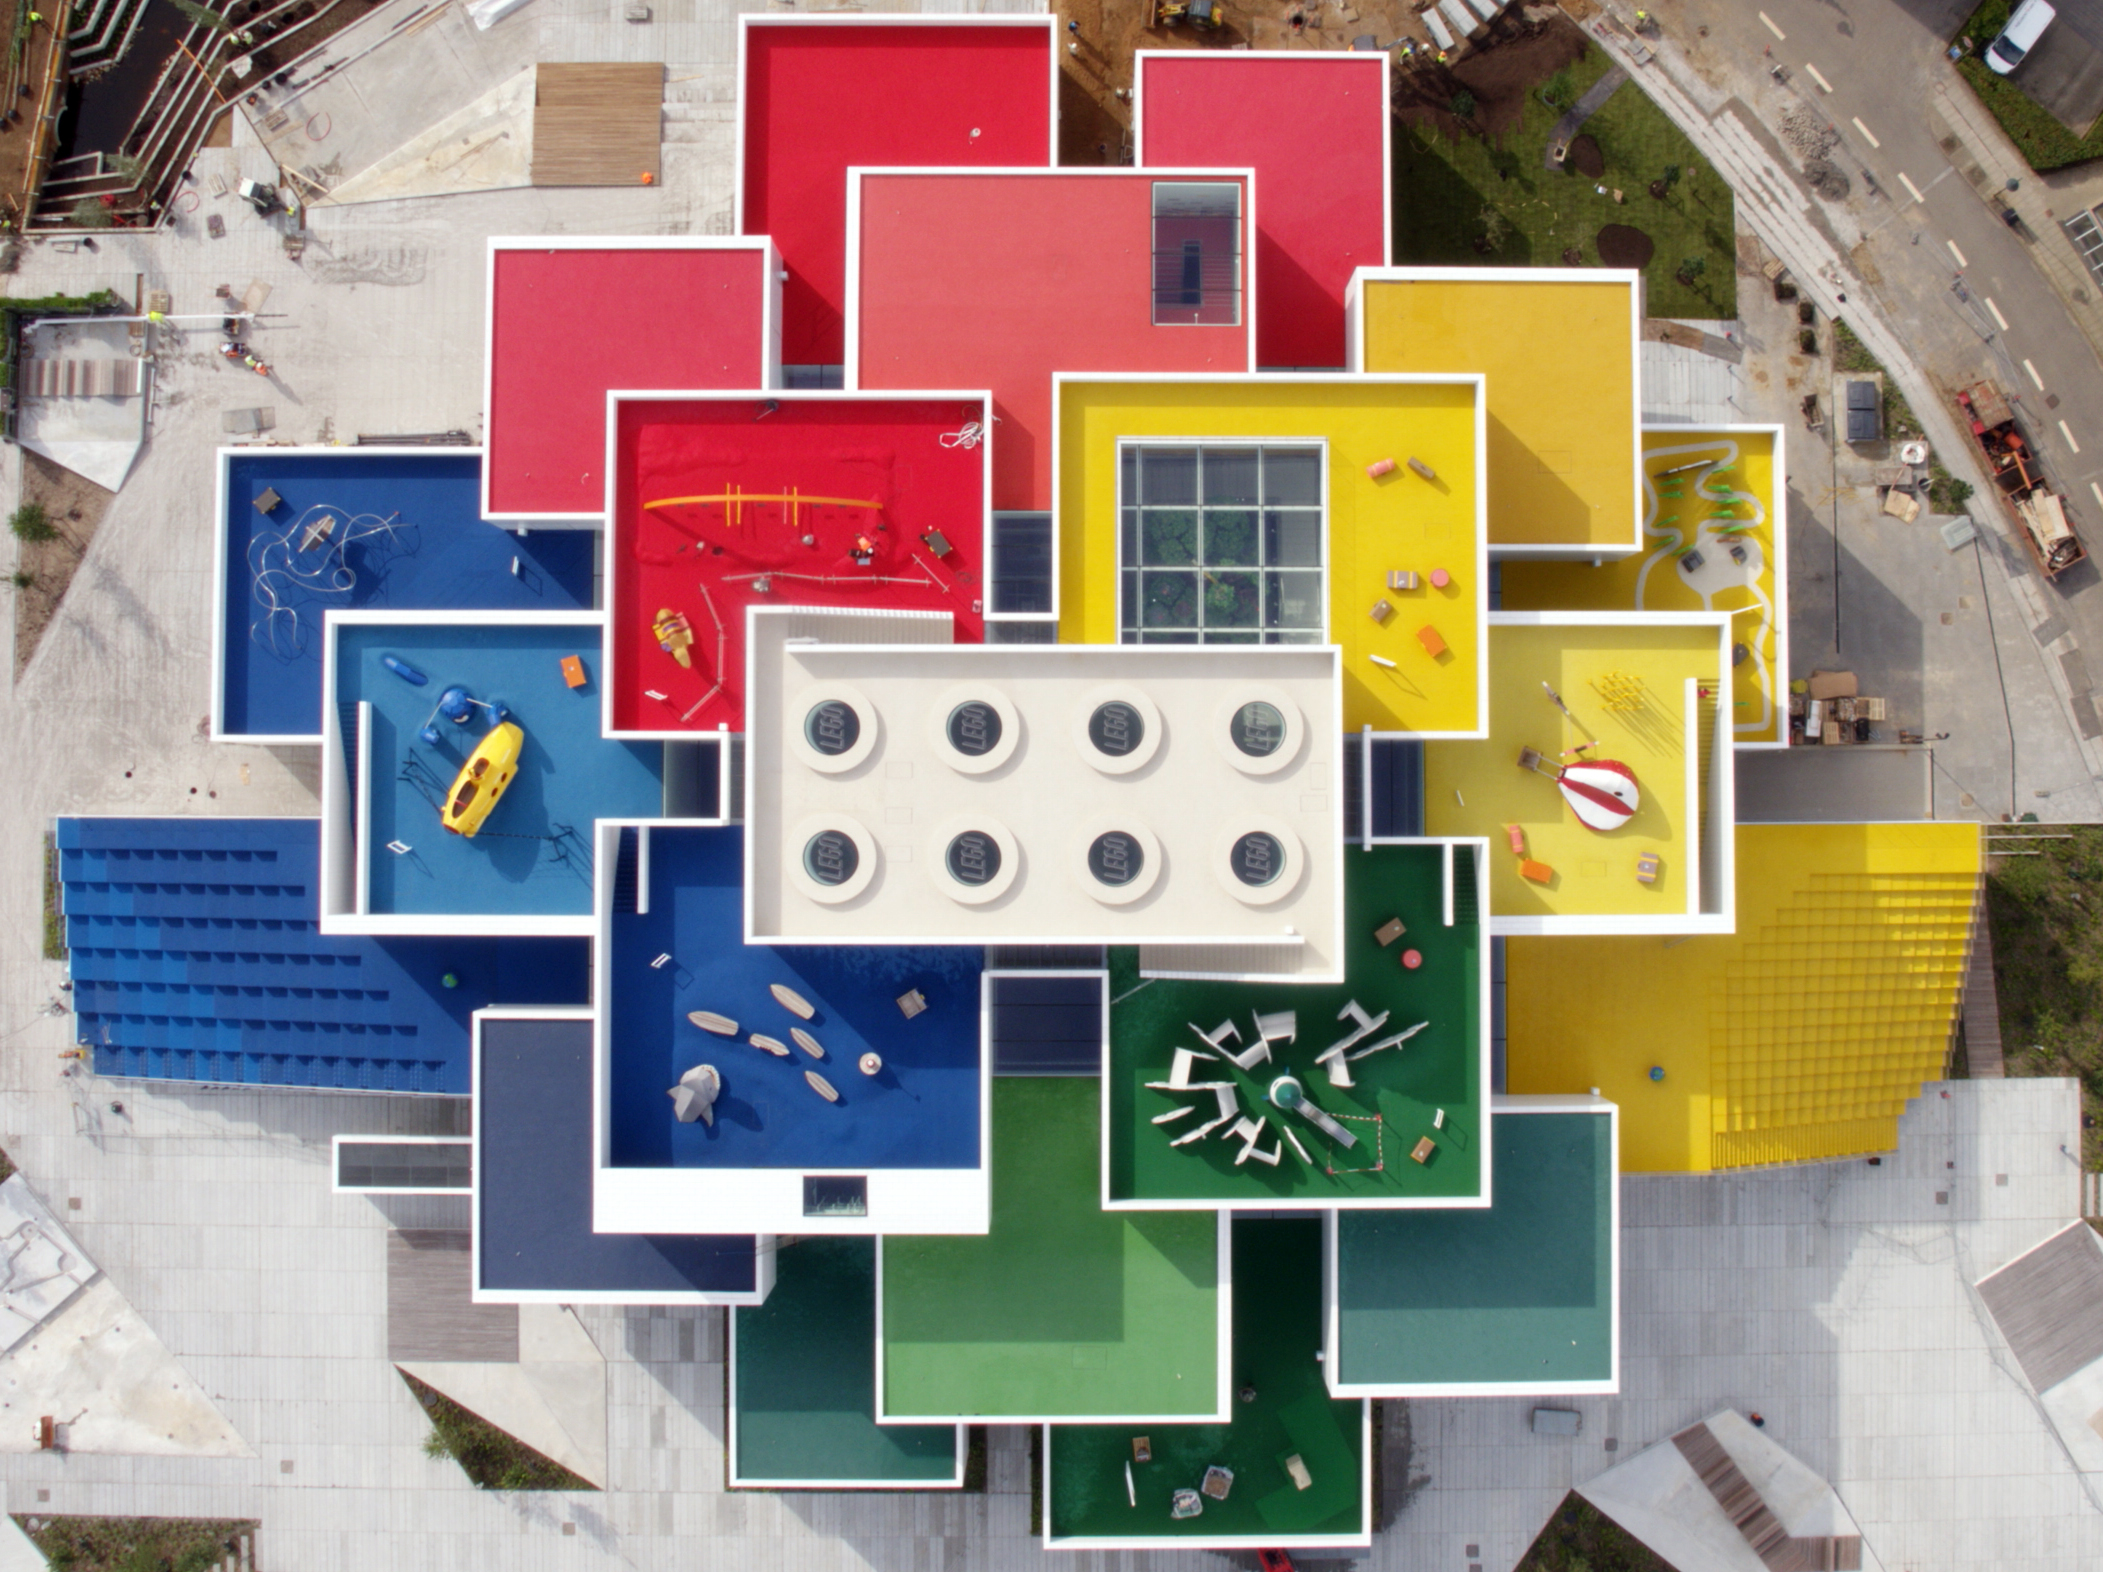 General 2103x1572 architecture building cityscape city aerial view LEGO bricks road Denmark colorful rooftops Google LEGO House Billund